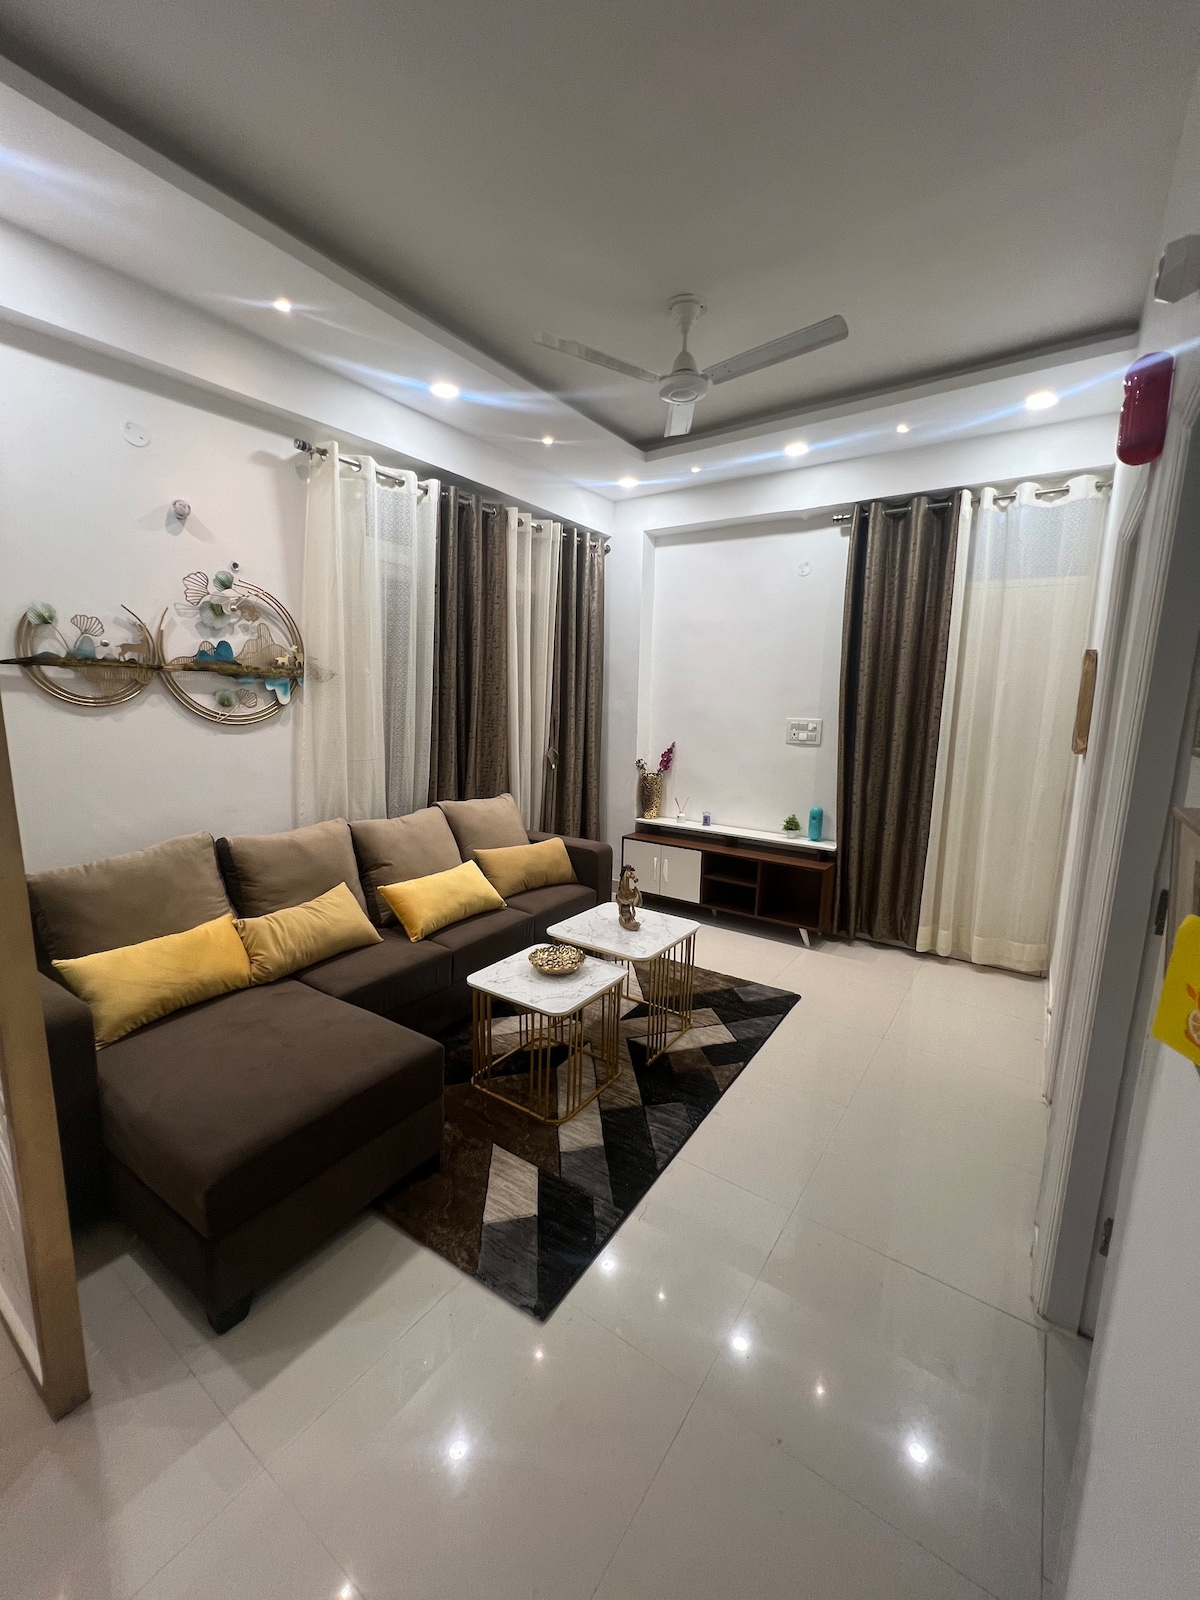 2BHK Good Flat For Sharing Room